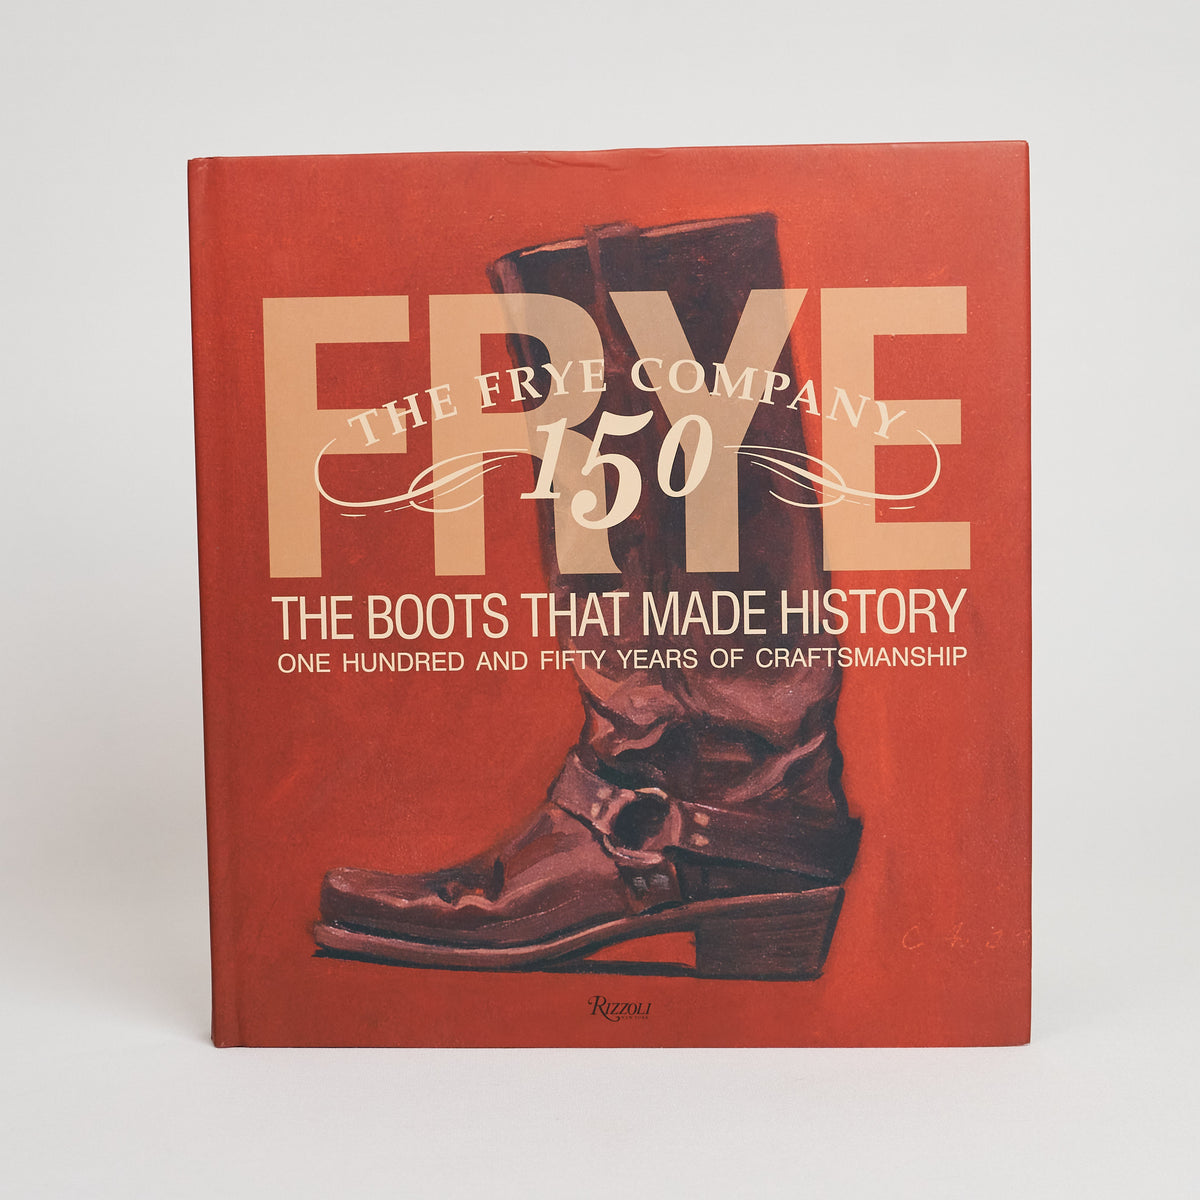 The Frye Boot Company – The Boots that Made History, 150 Years of Craftsmanship